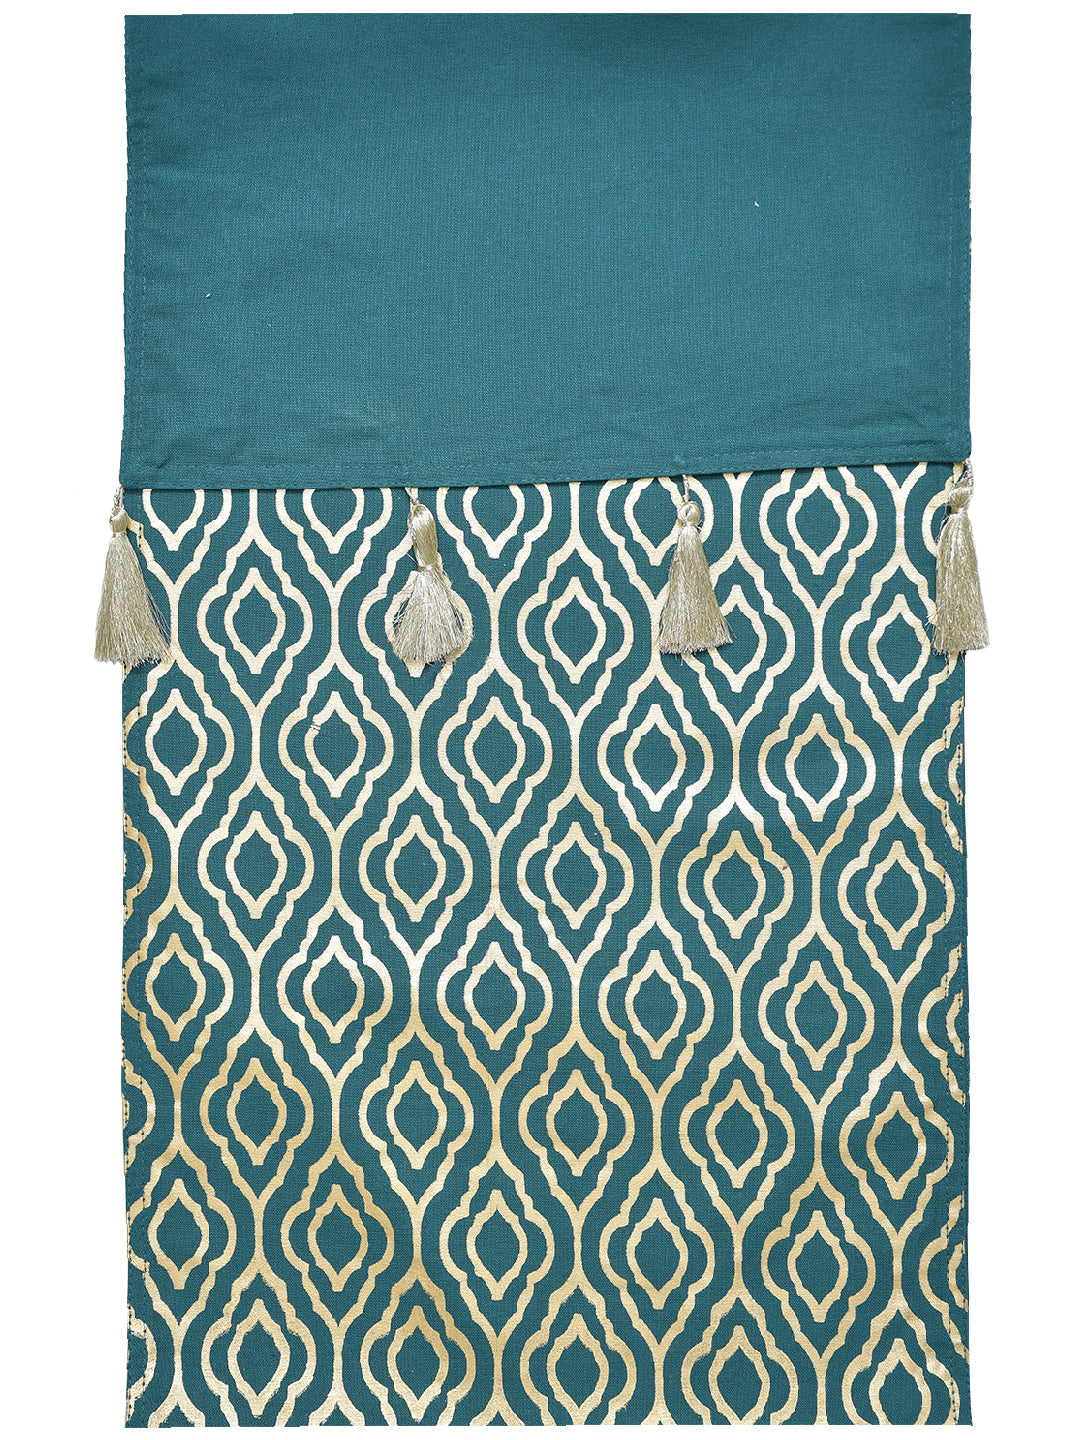 Blanc9 Roshan Teal Colored 100% Cotton Printed 4/6 Seater Table Runner